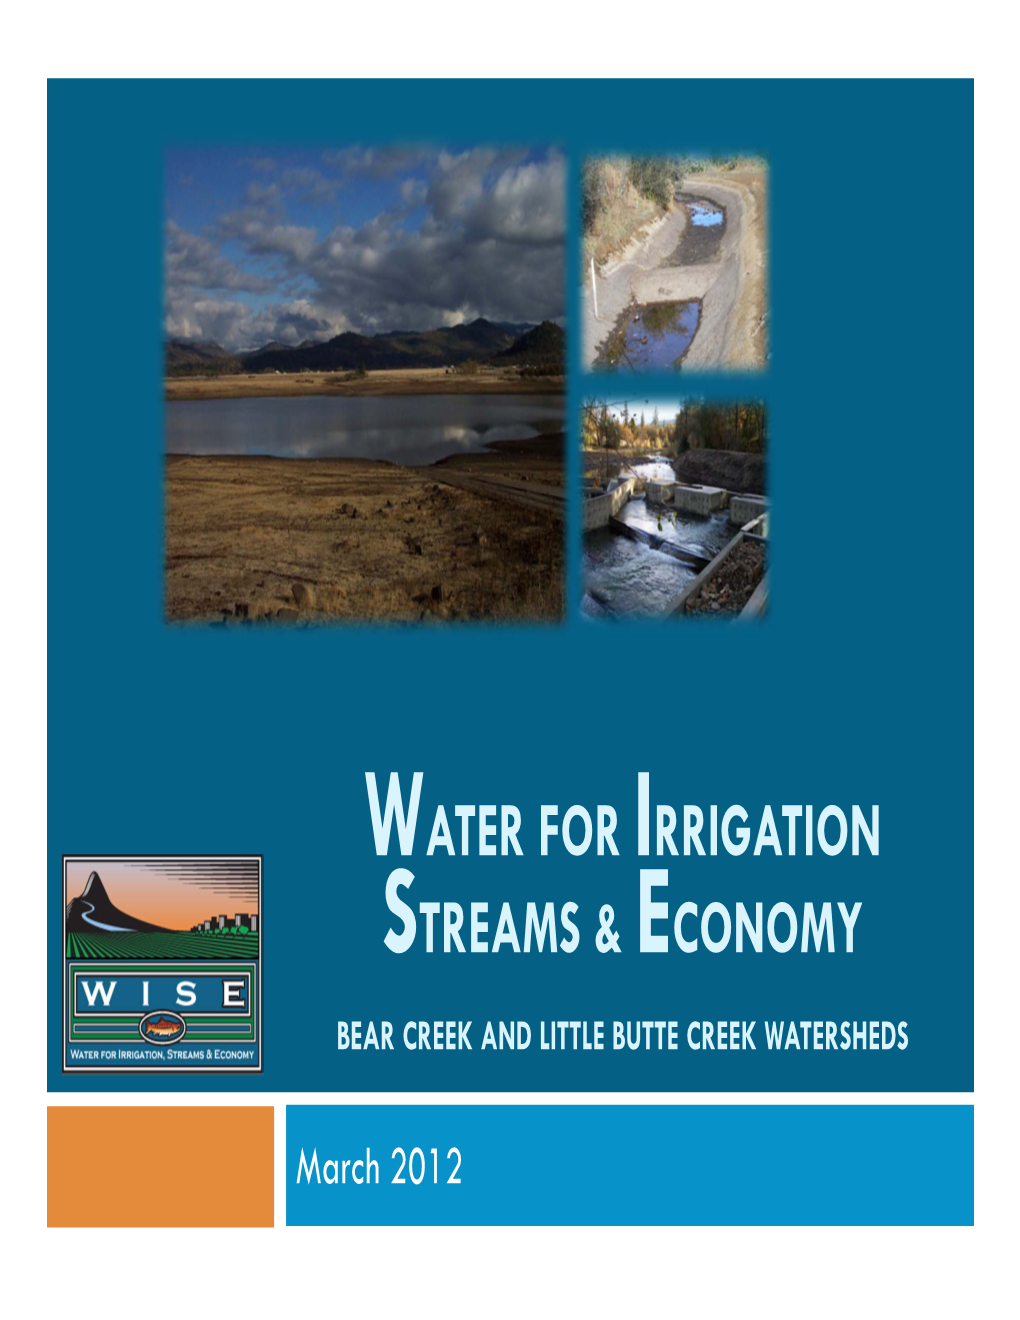 Water for Irrigation Streams & Economy